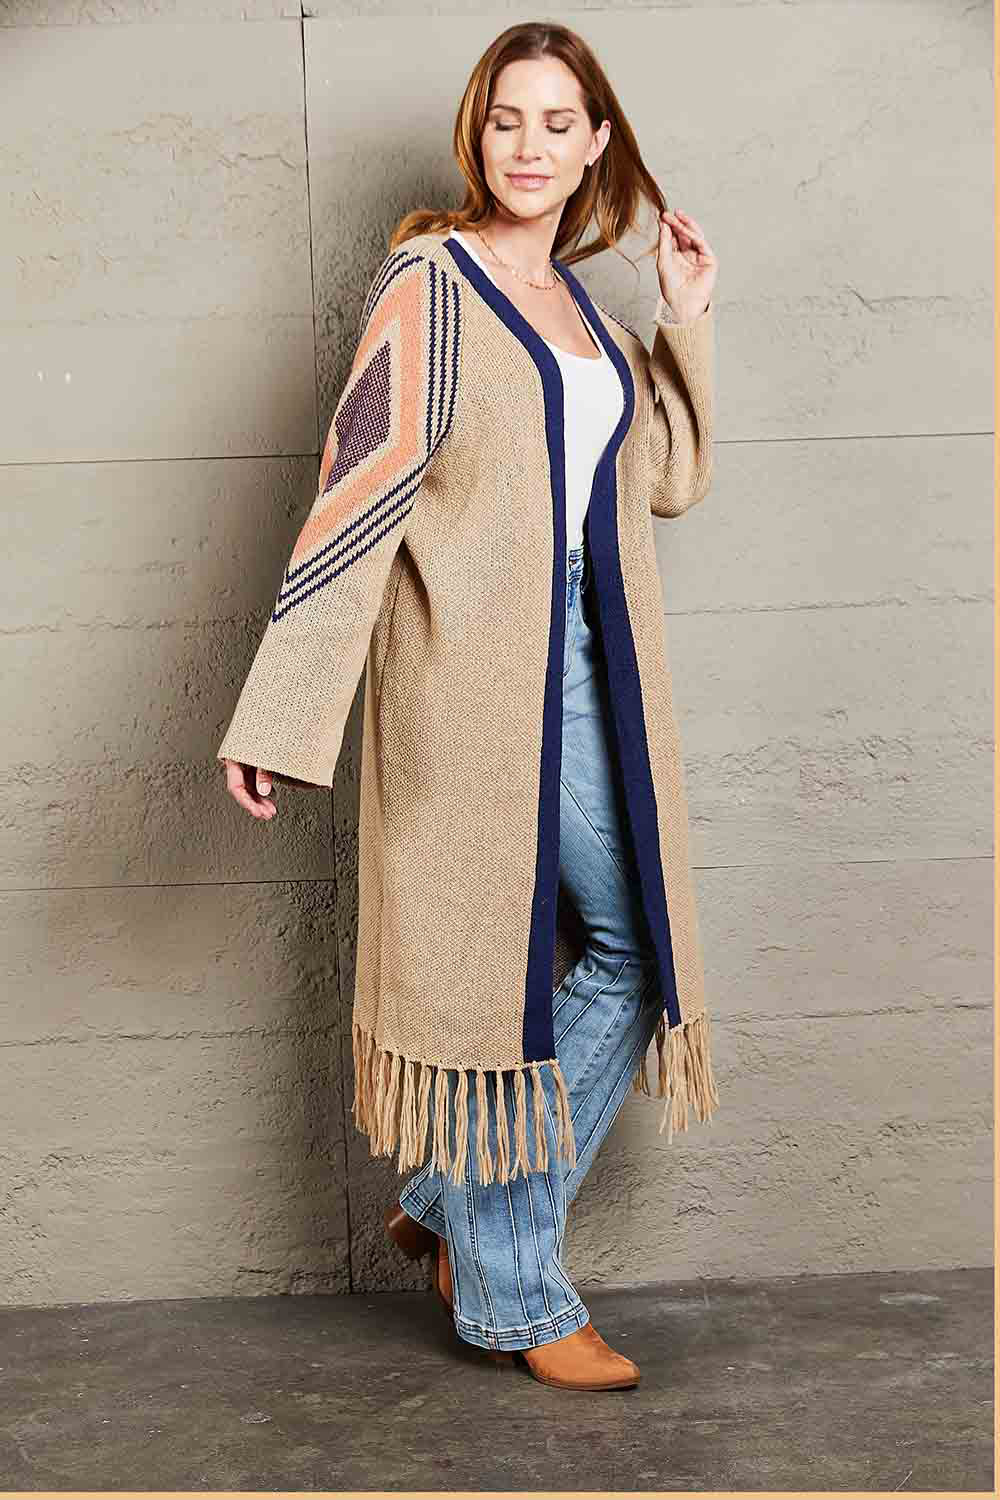 Fringe Retro Geometric Knit Cardigan Sleeve Colorful Open Front Sweater Duster